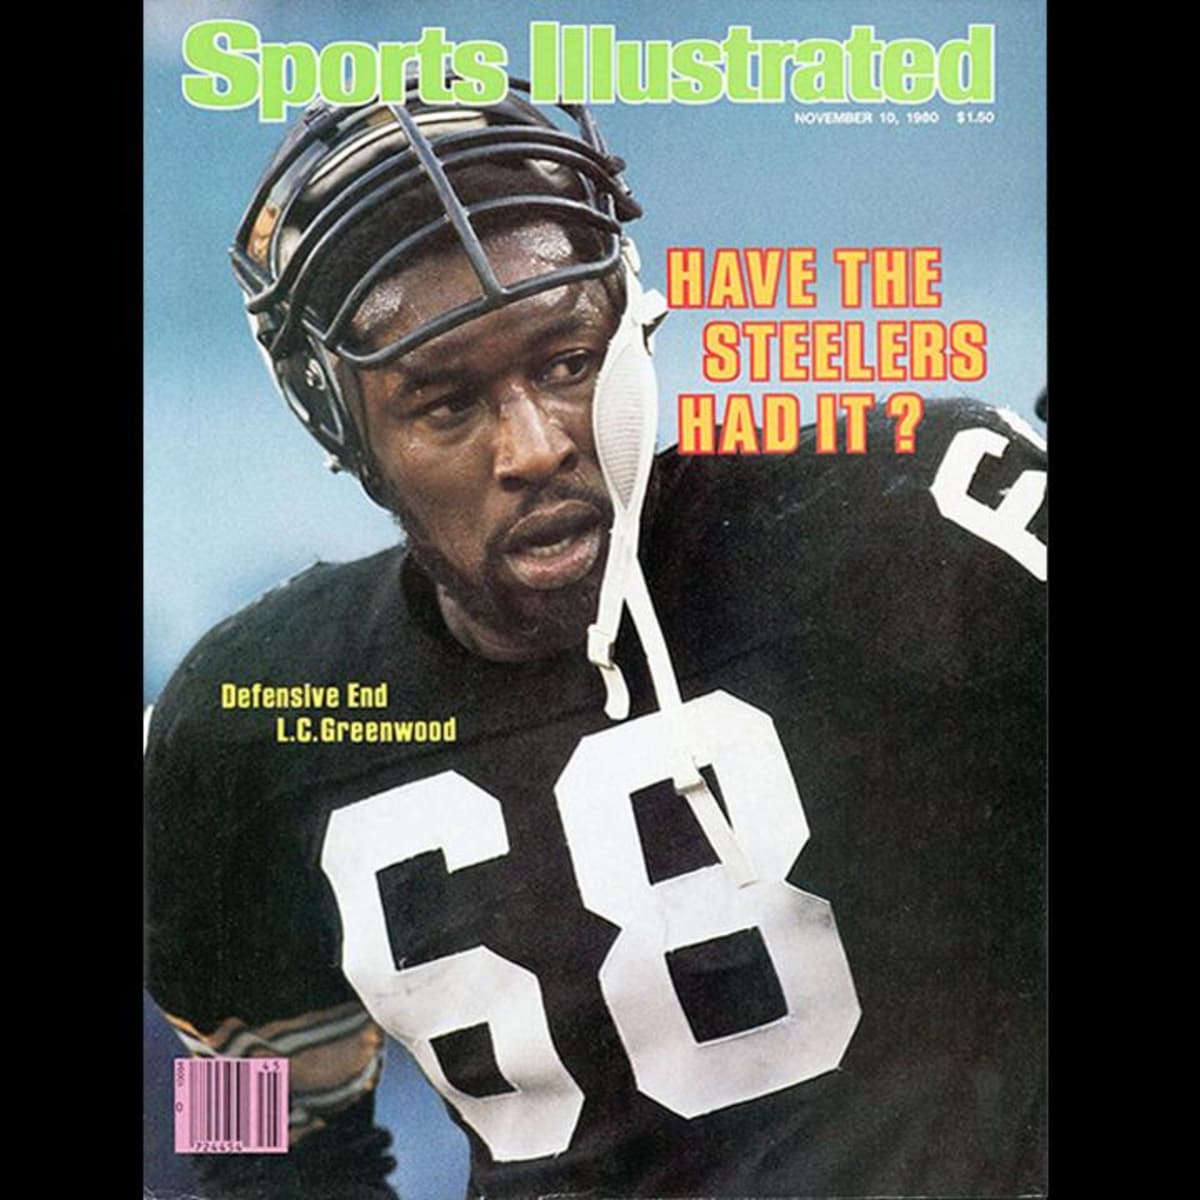 Man of Steal - Sports Illustrated Vault